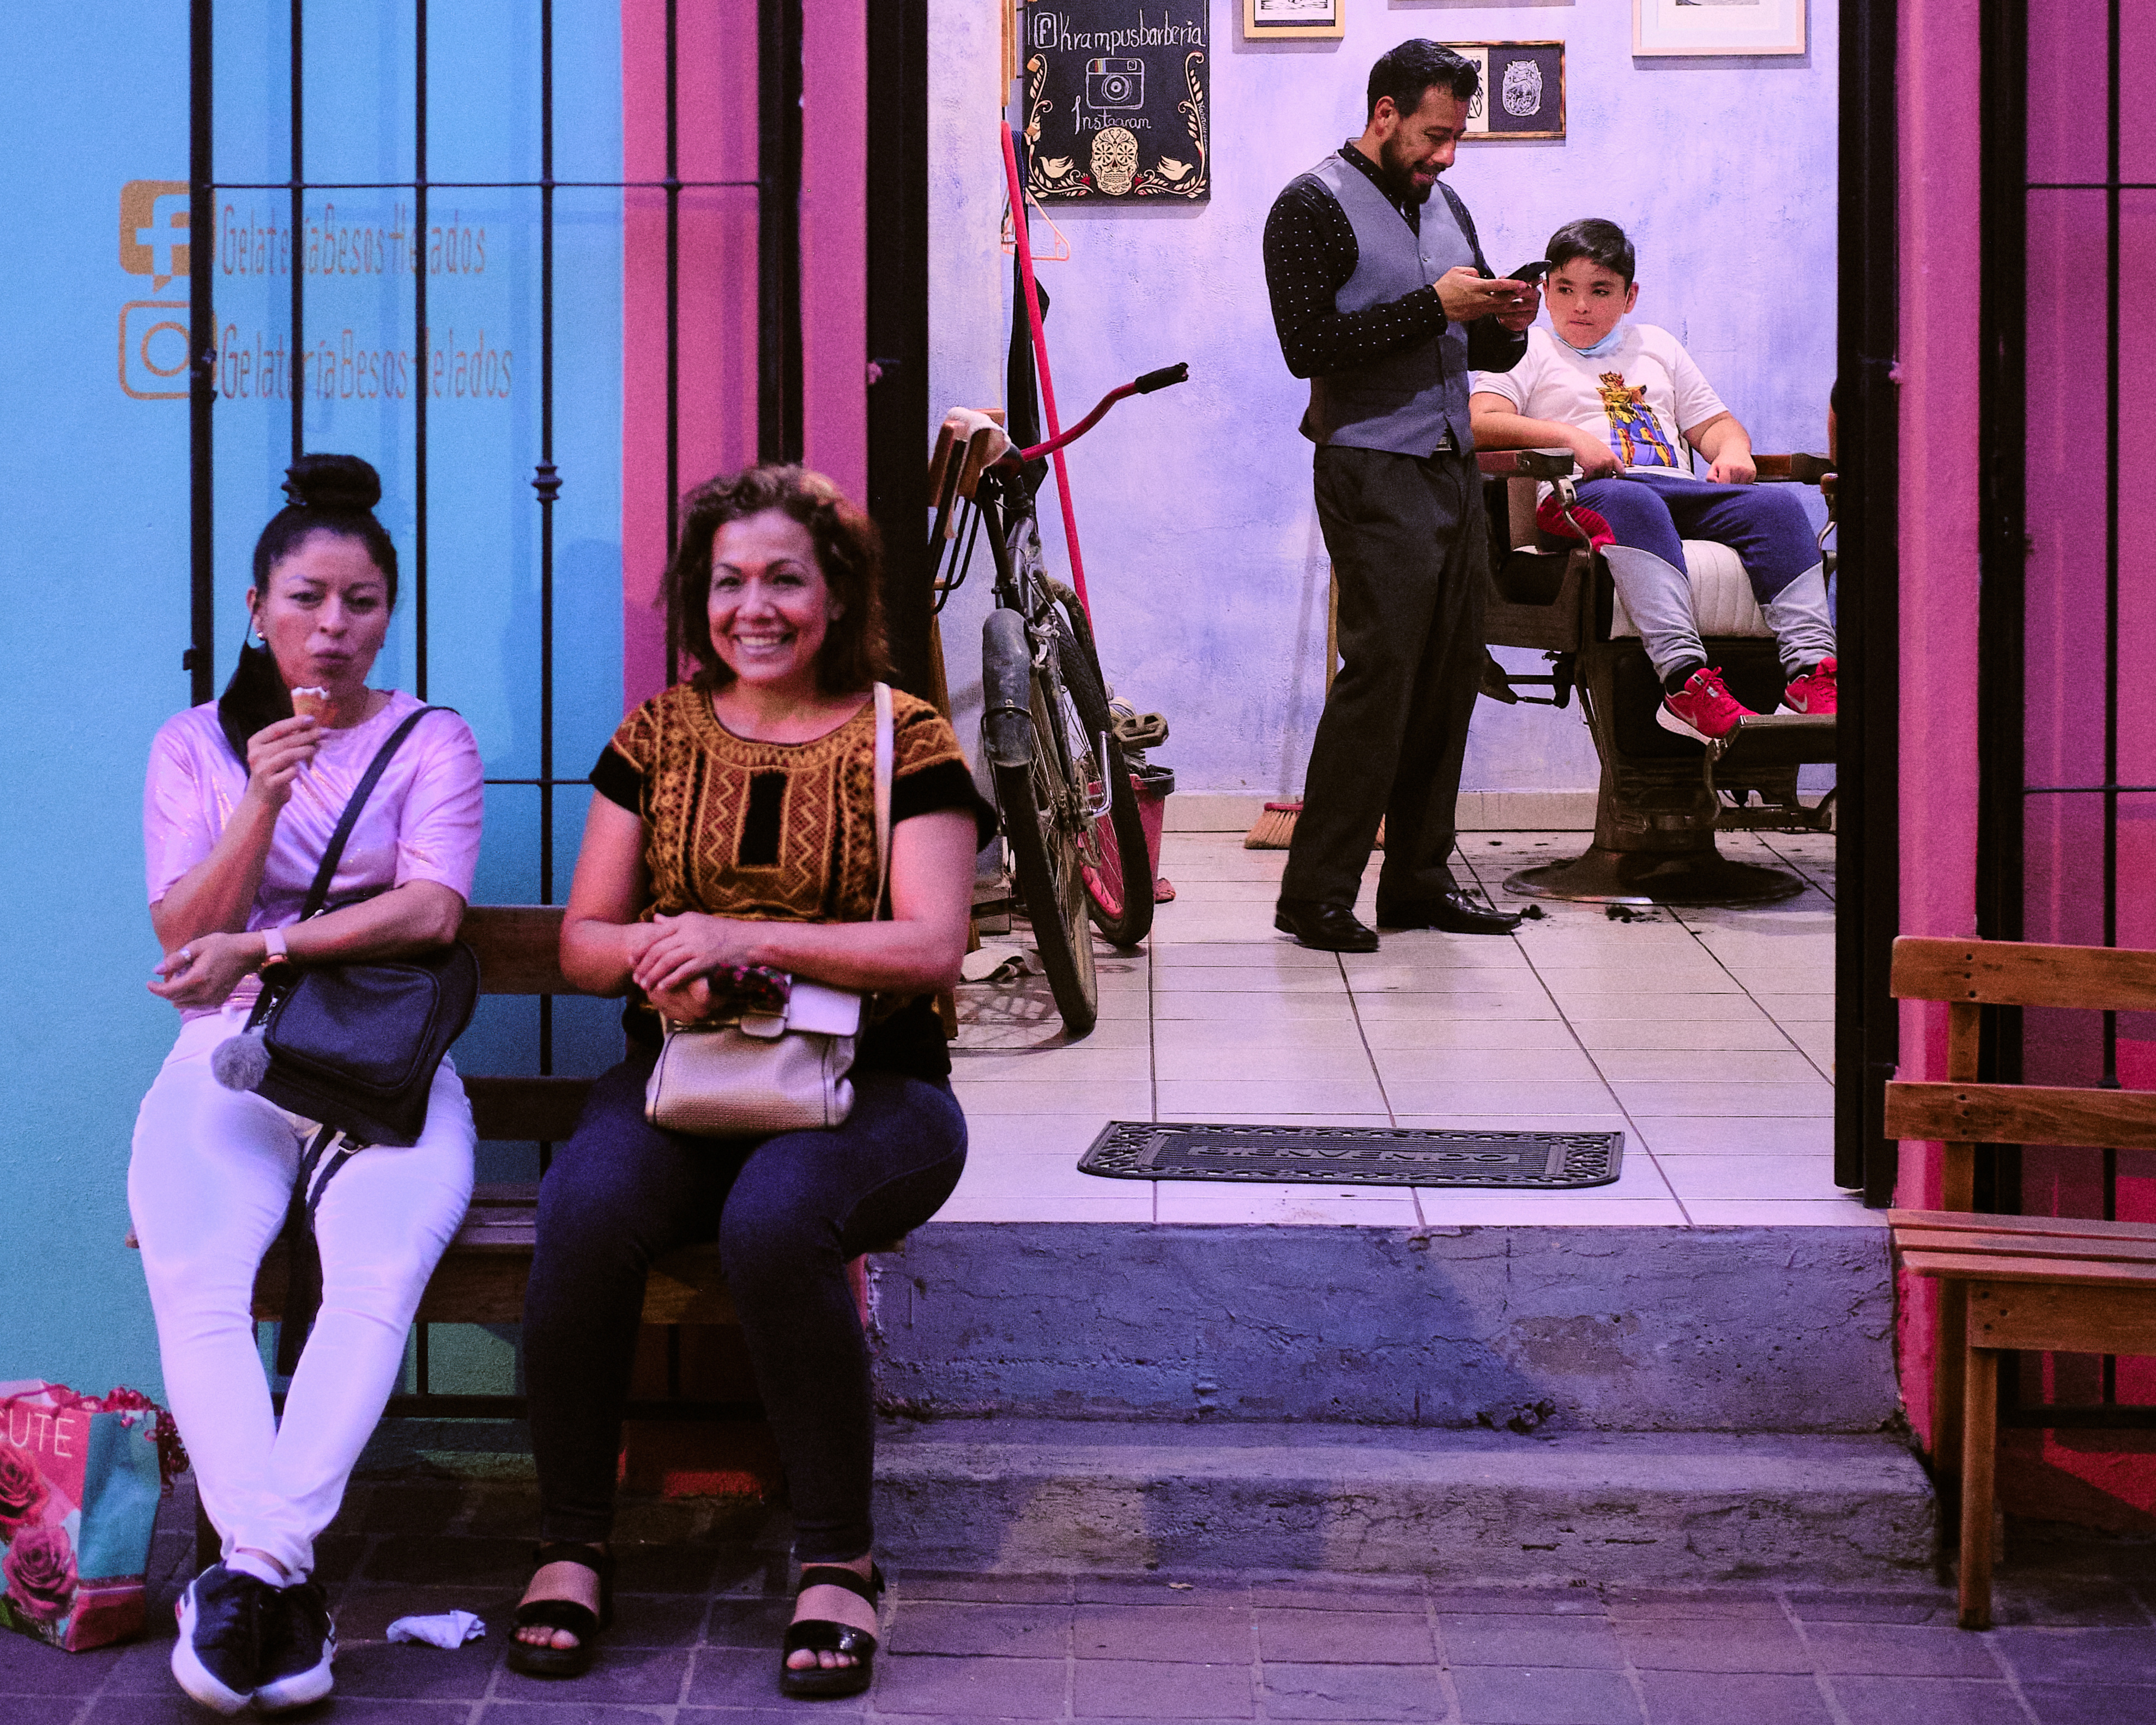 5 Awesome Places for Street Photography in Latin America